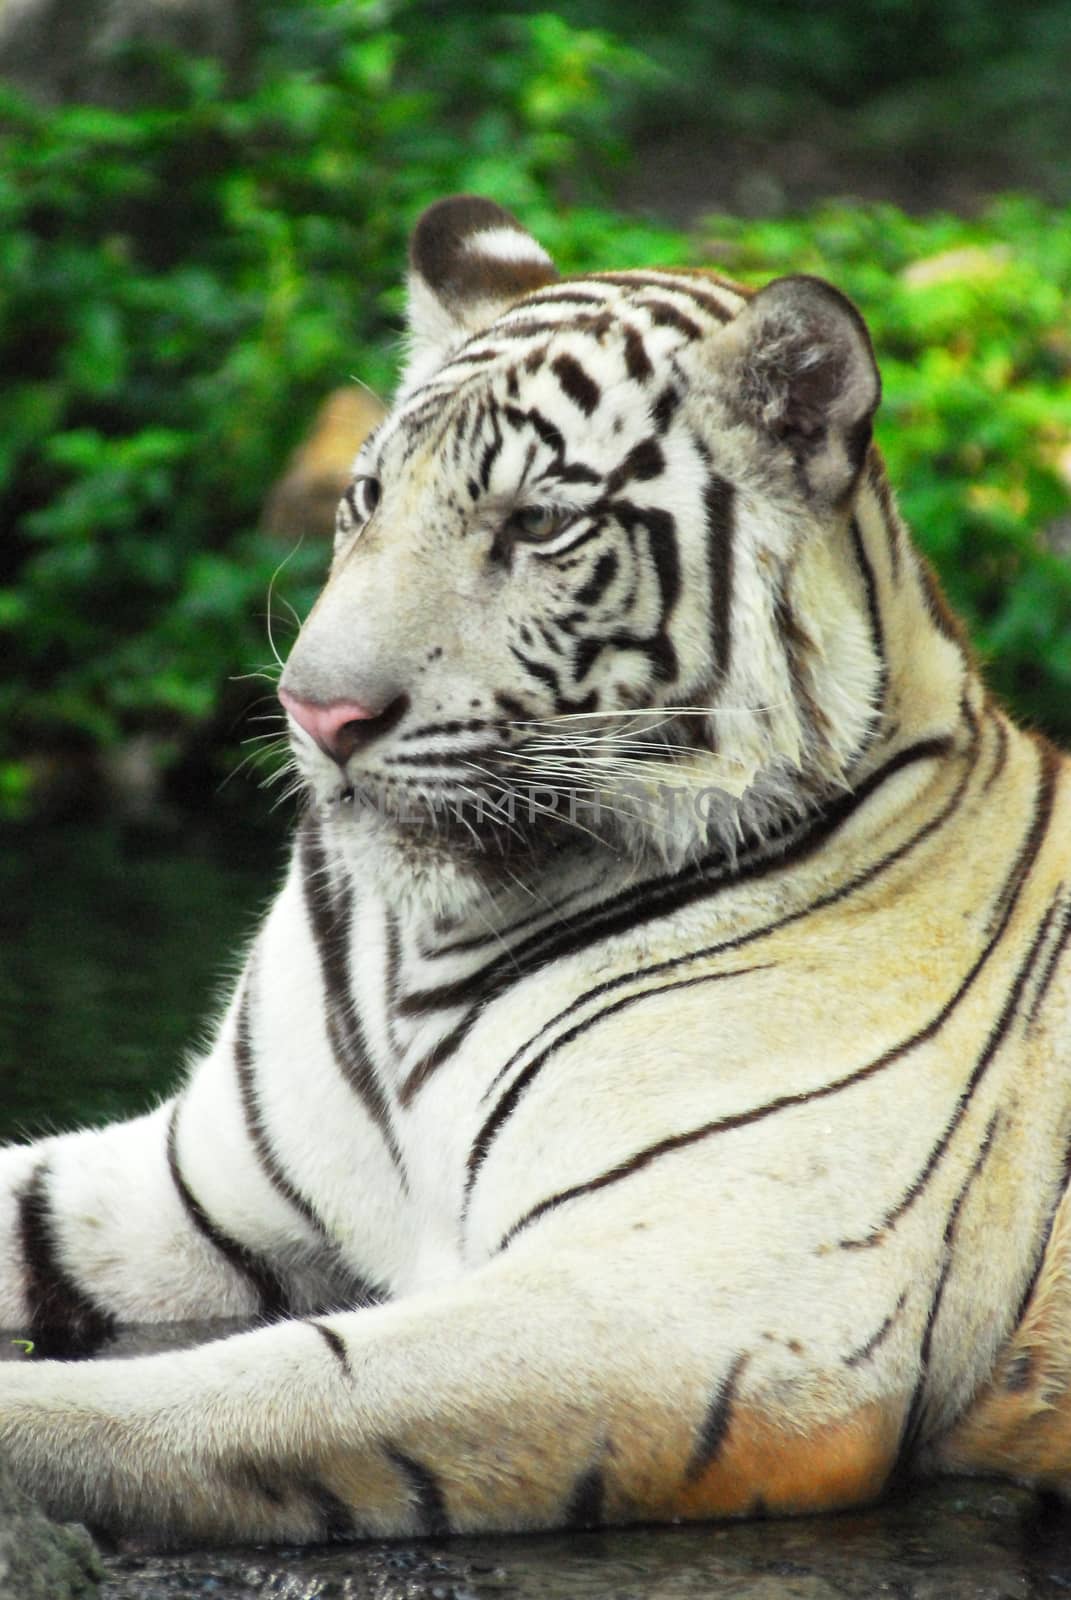 A wild life shot of a white tiger in captivity by think4photop